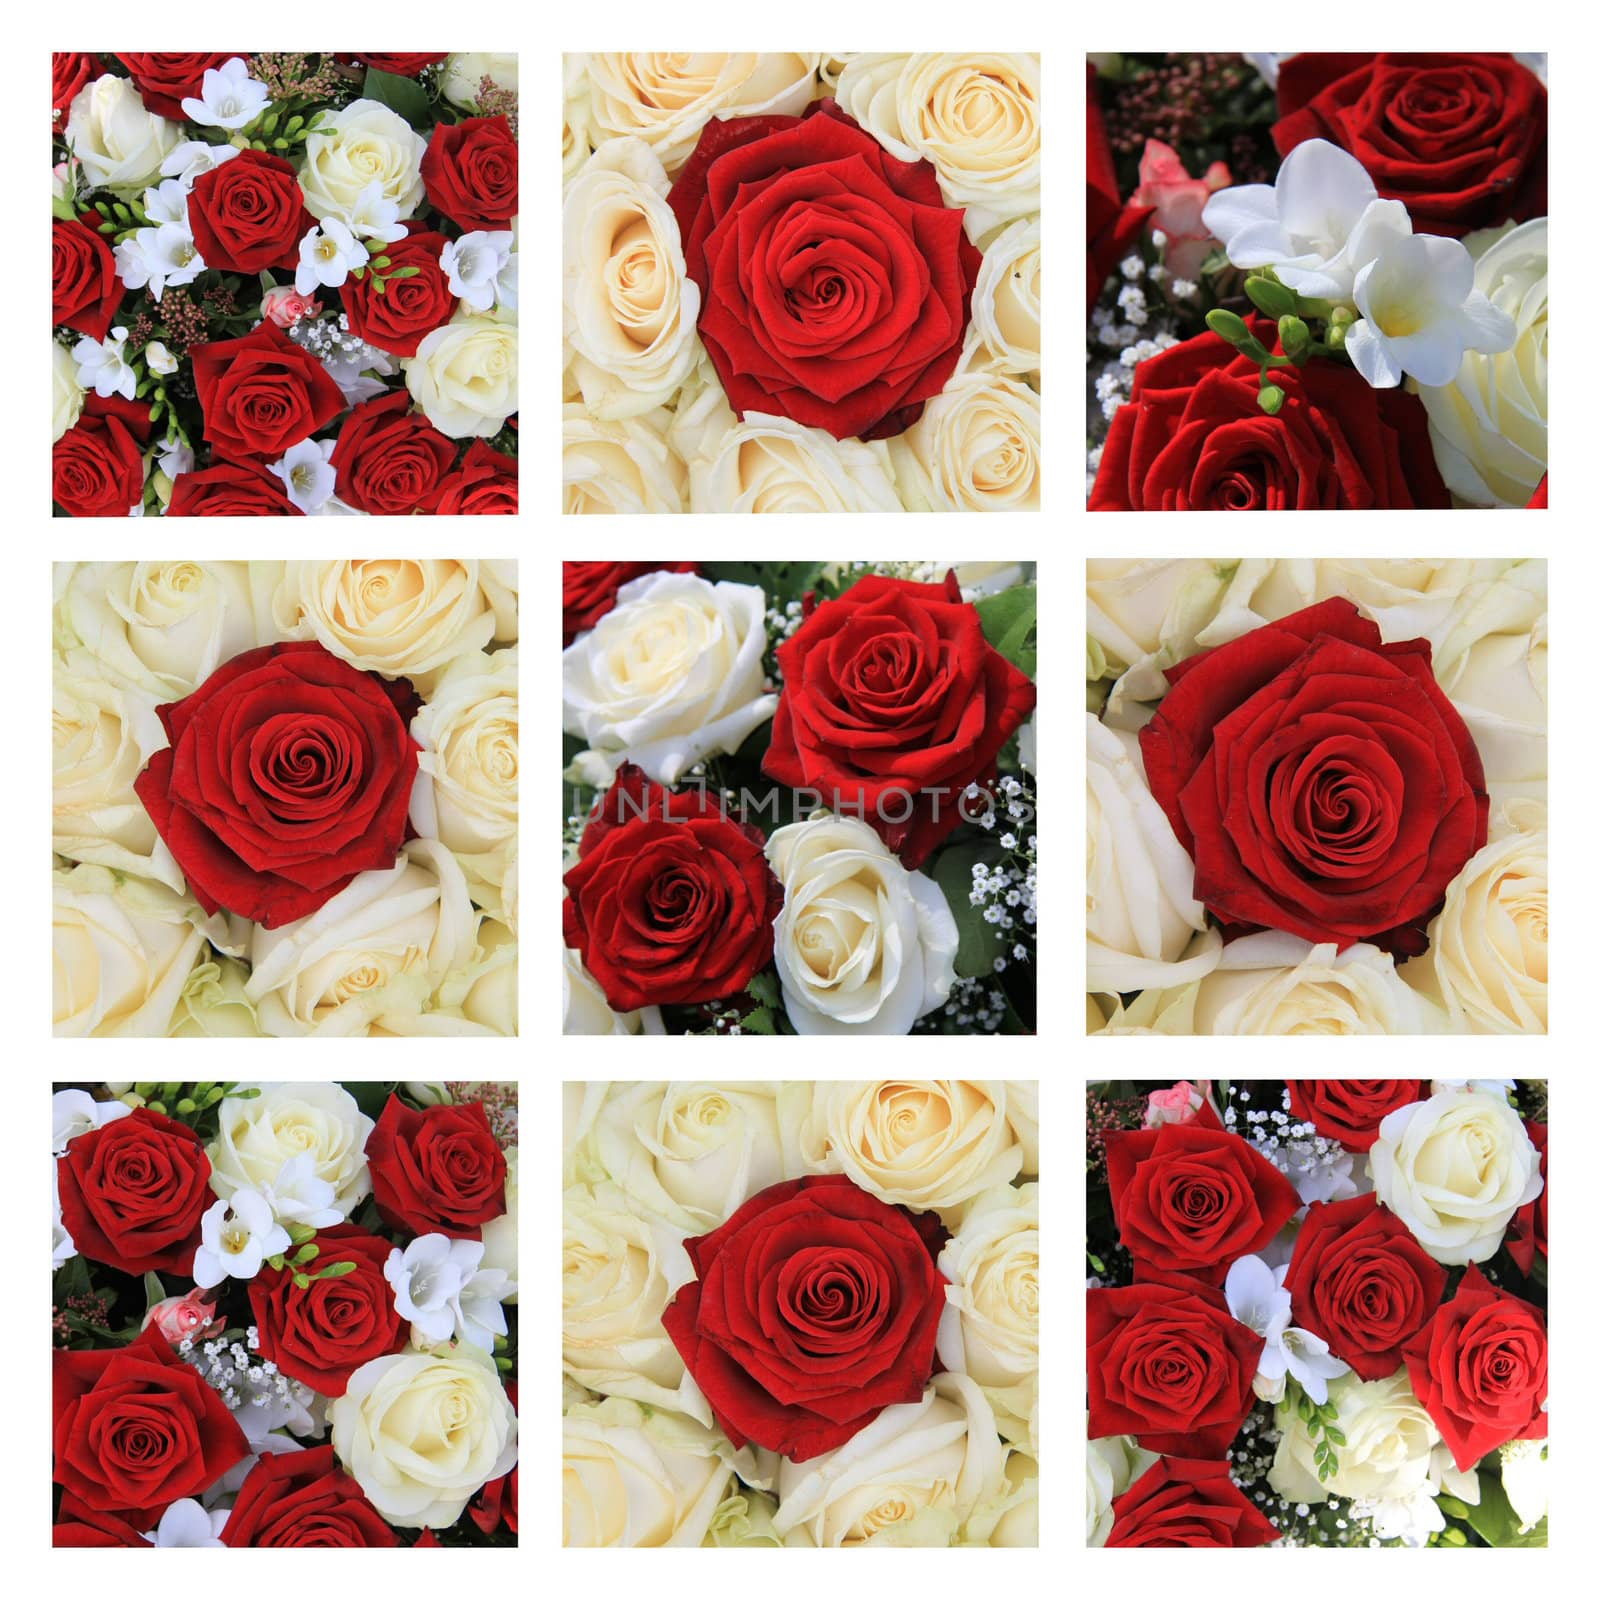 xL-collage made from 9 different high resolution rose images in red and white